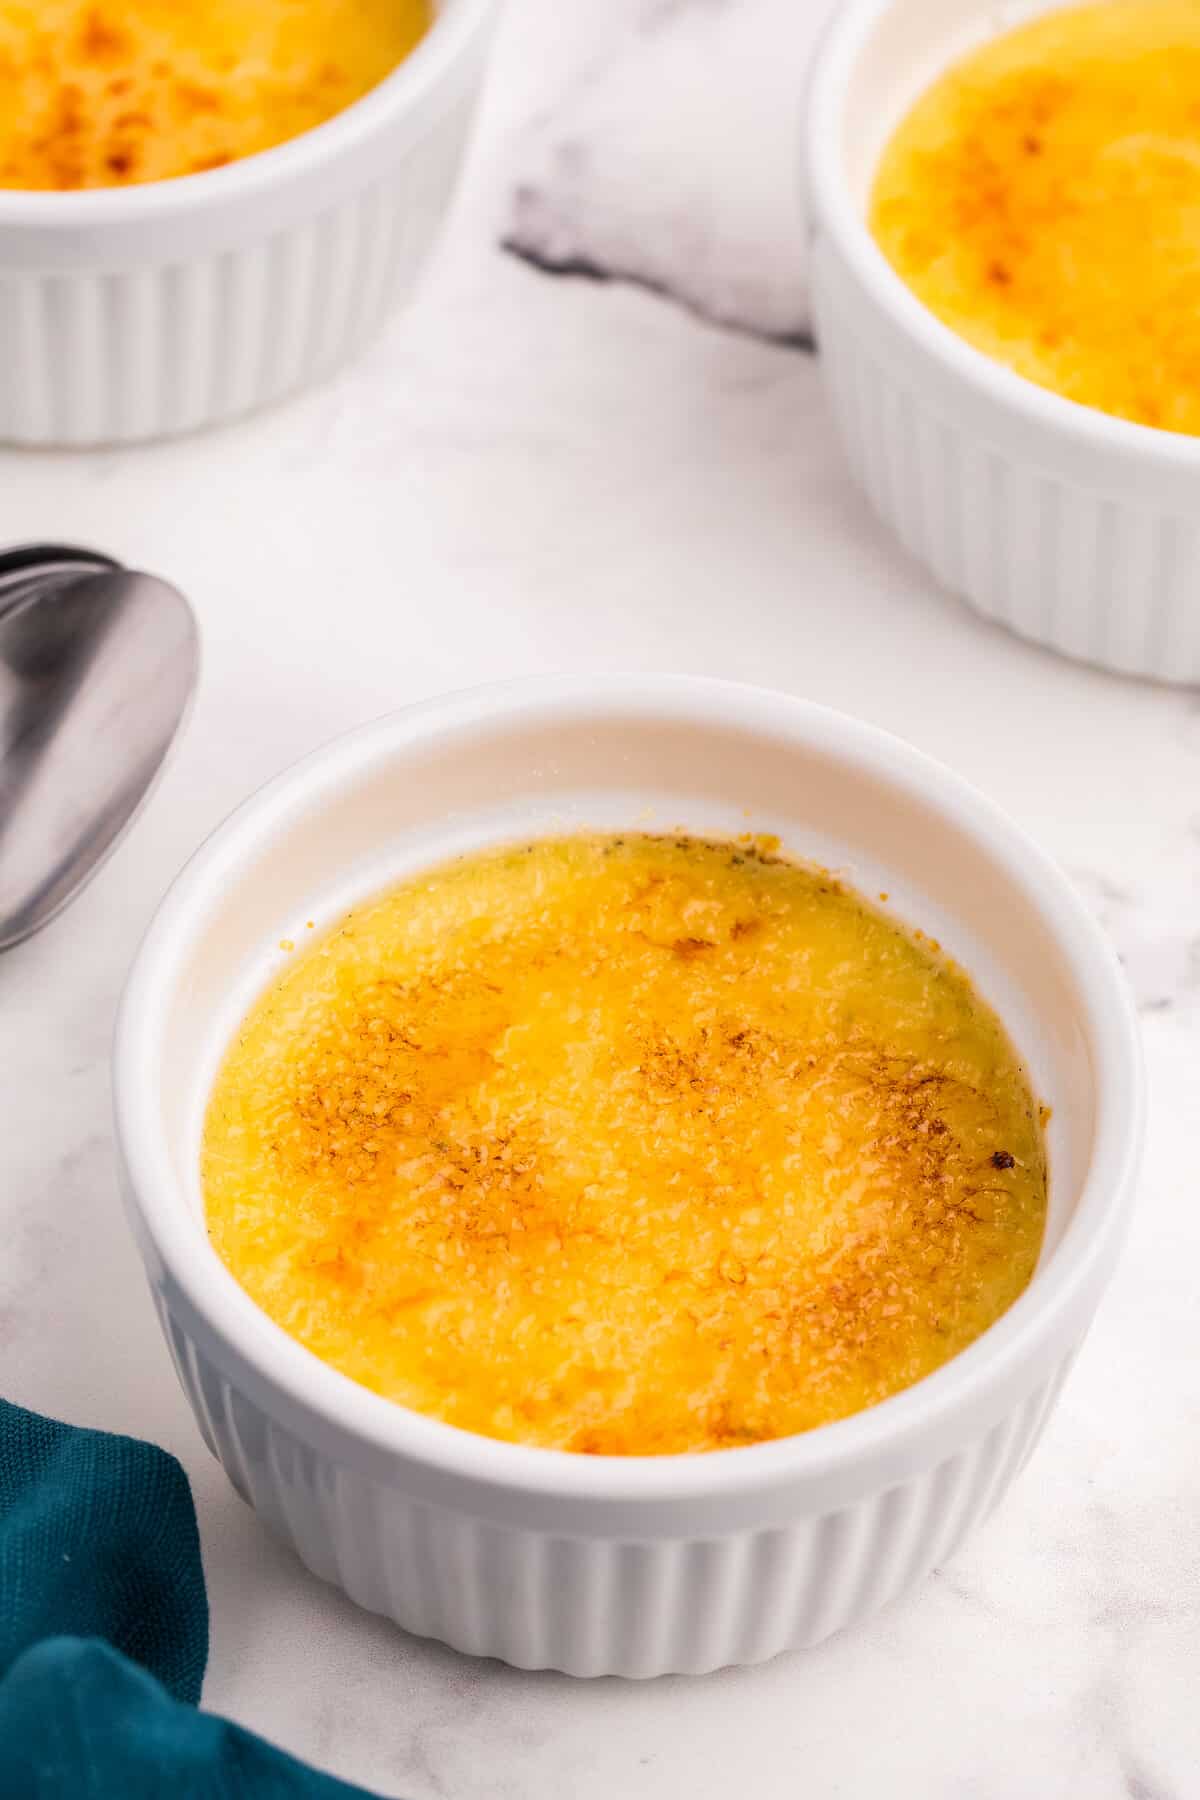 Creme Brulee after being torched